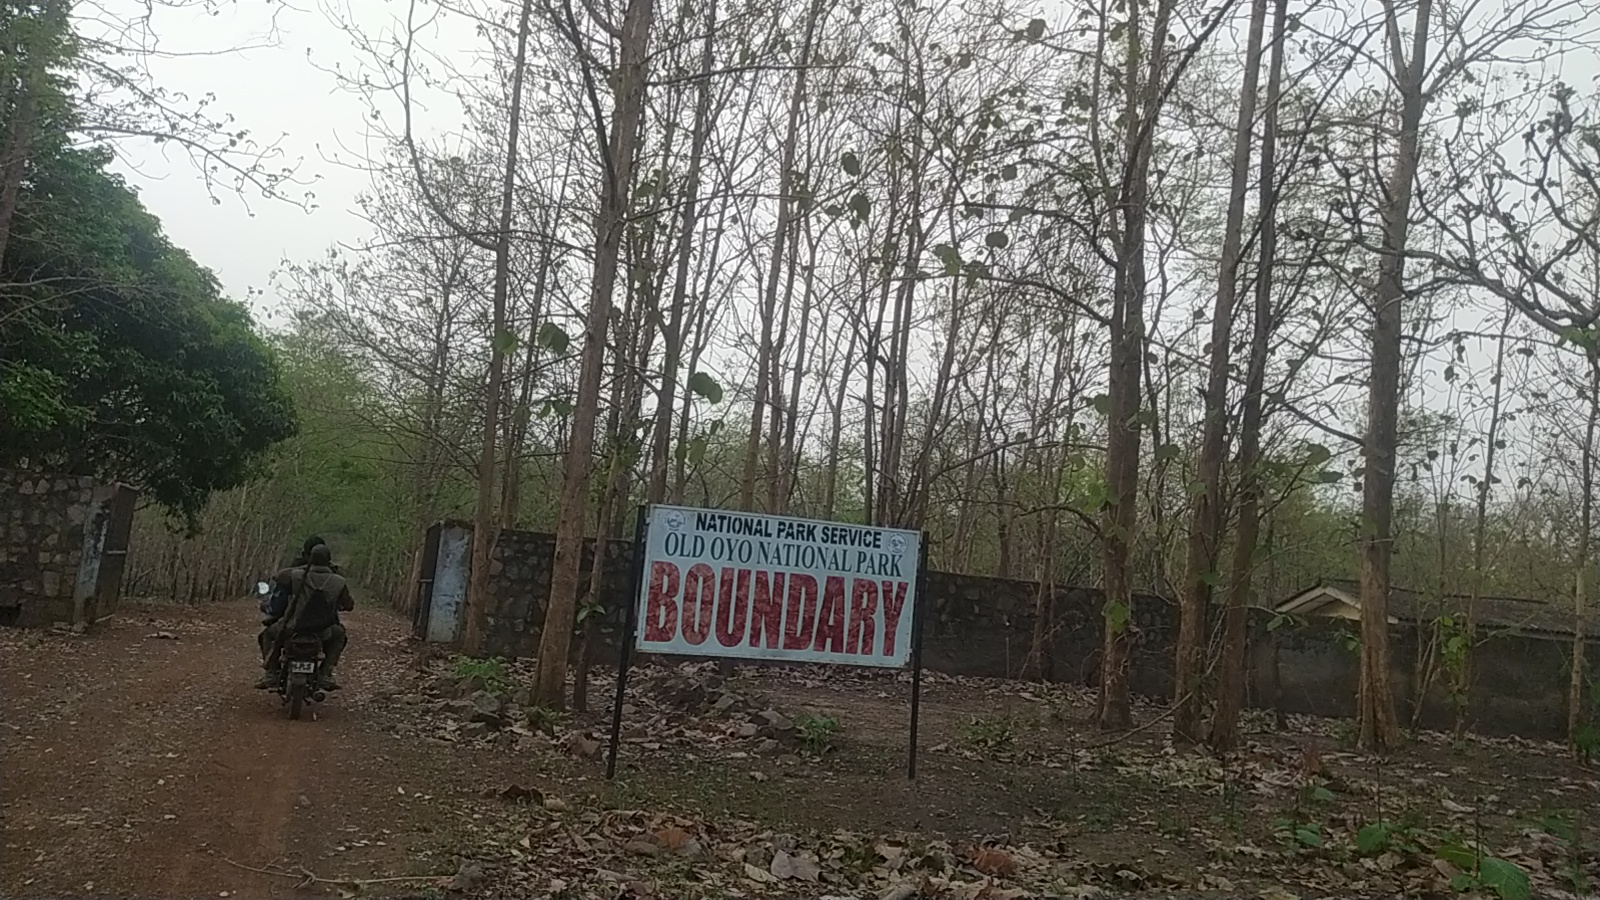 The entry into the Old Oyo National Park, showing the boundary 